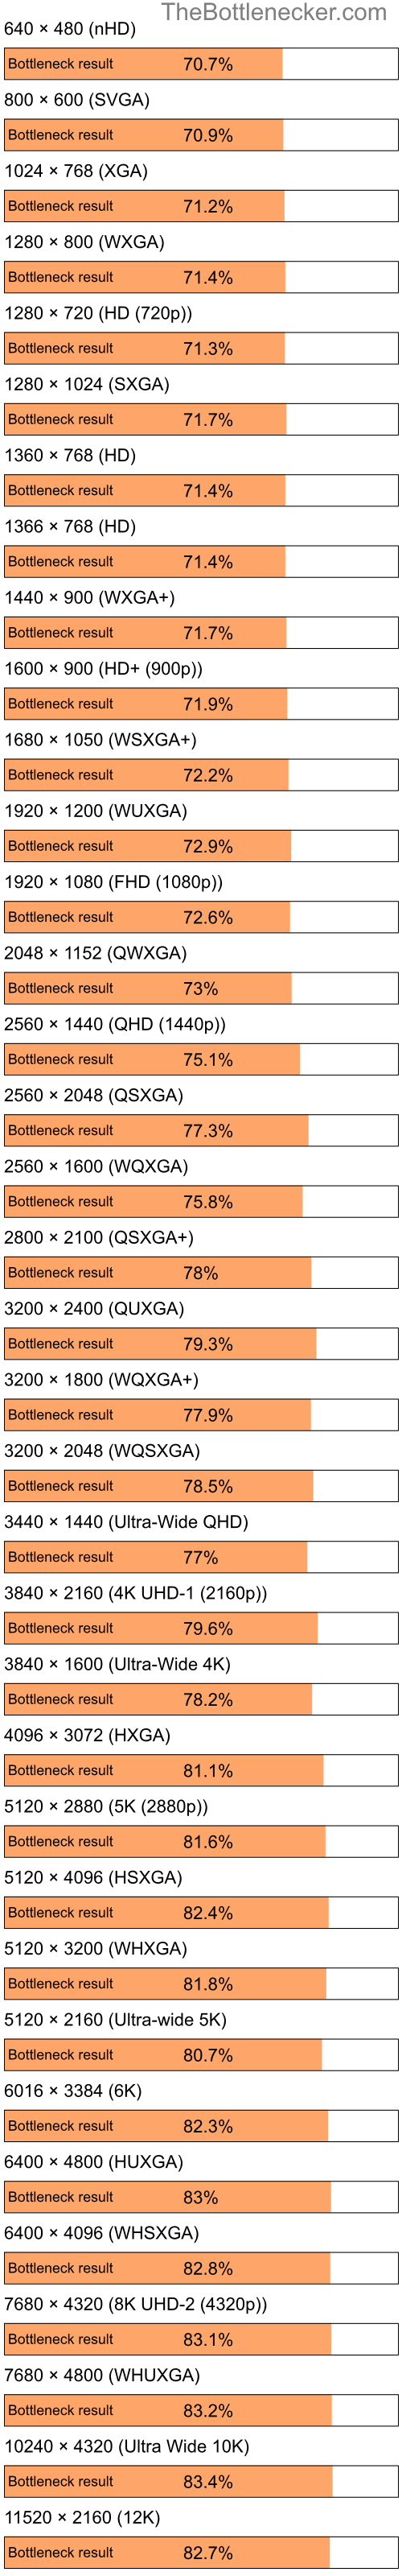 Bottleneck results by resolution for Intel Atom Z520 and AMD Mobility Radeon 9700 in Processor Intense Tasks